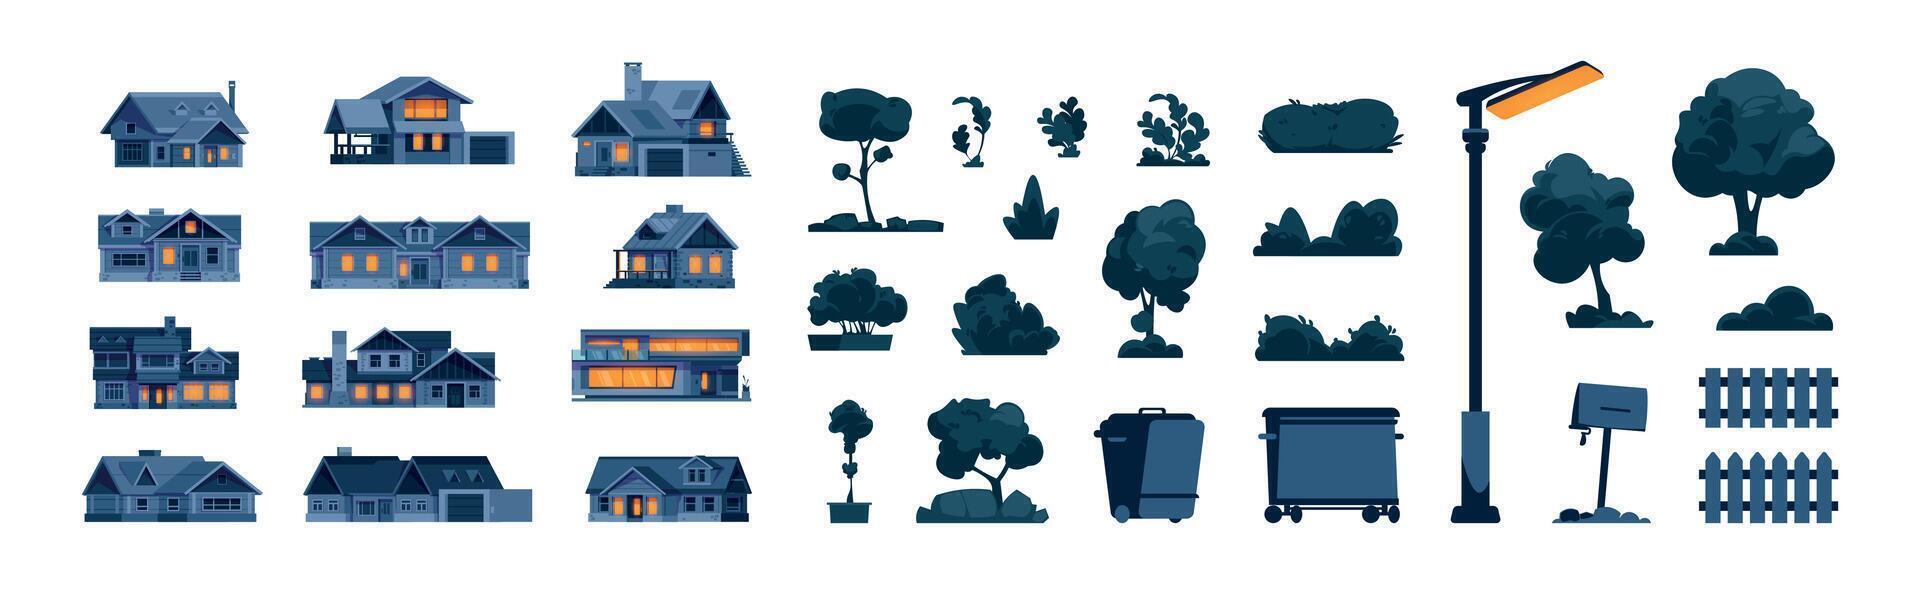 Night suburban elements. Cartoon cottage houses at night, bushes, trees, street lamps and garbage container. Vector night street constructor kit